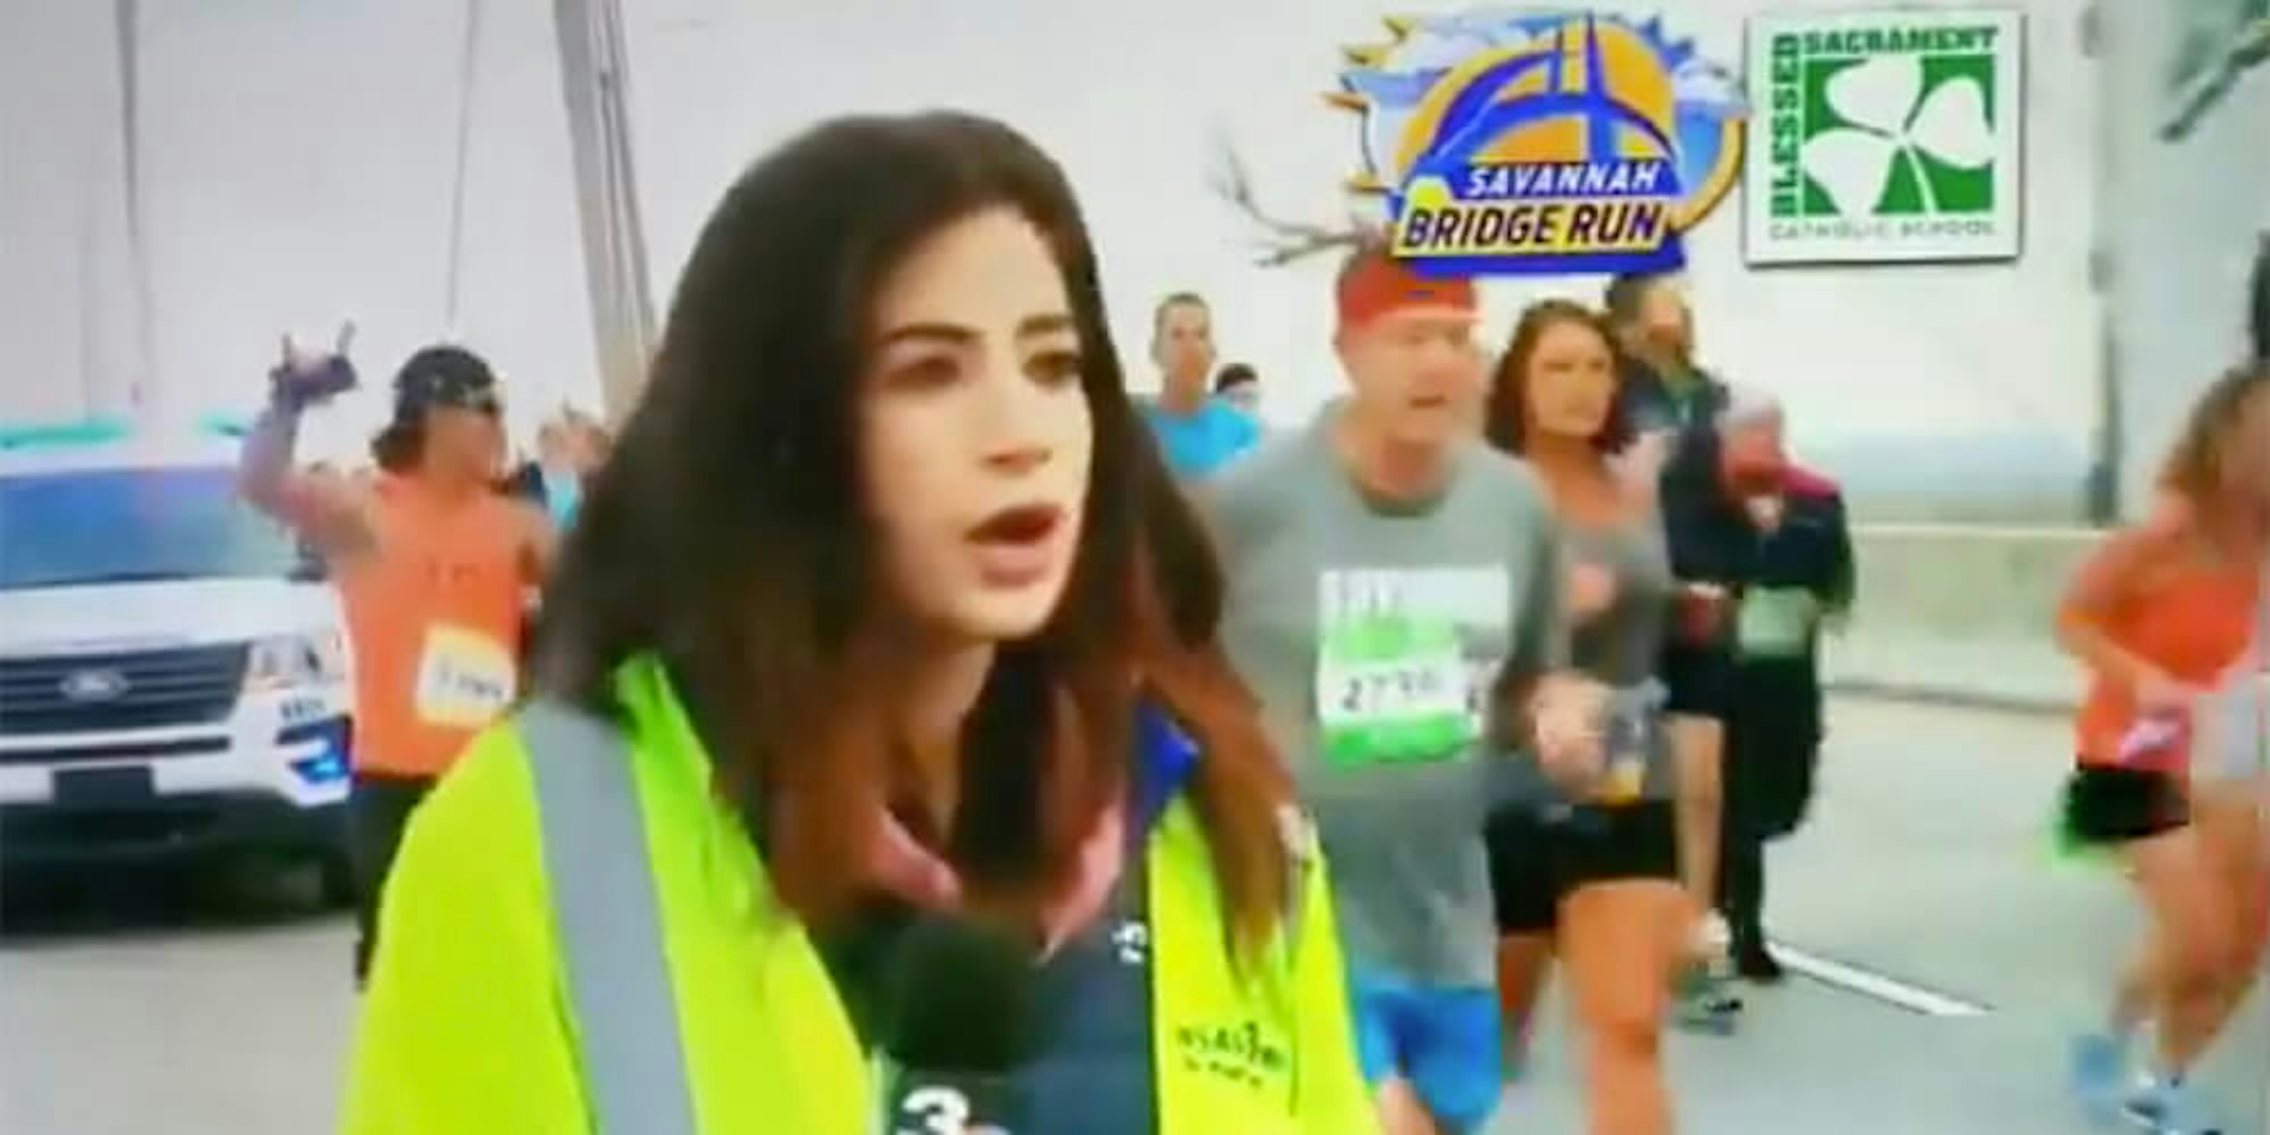 runner hits reporter's behind as he runs past during live tv broadcast